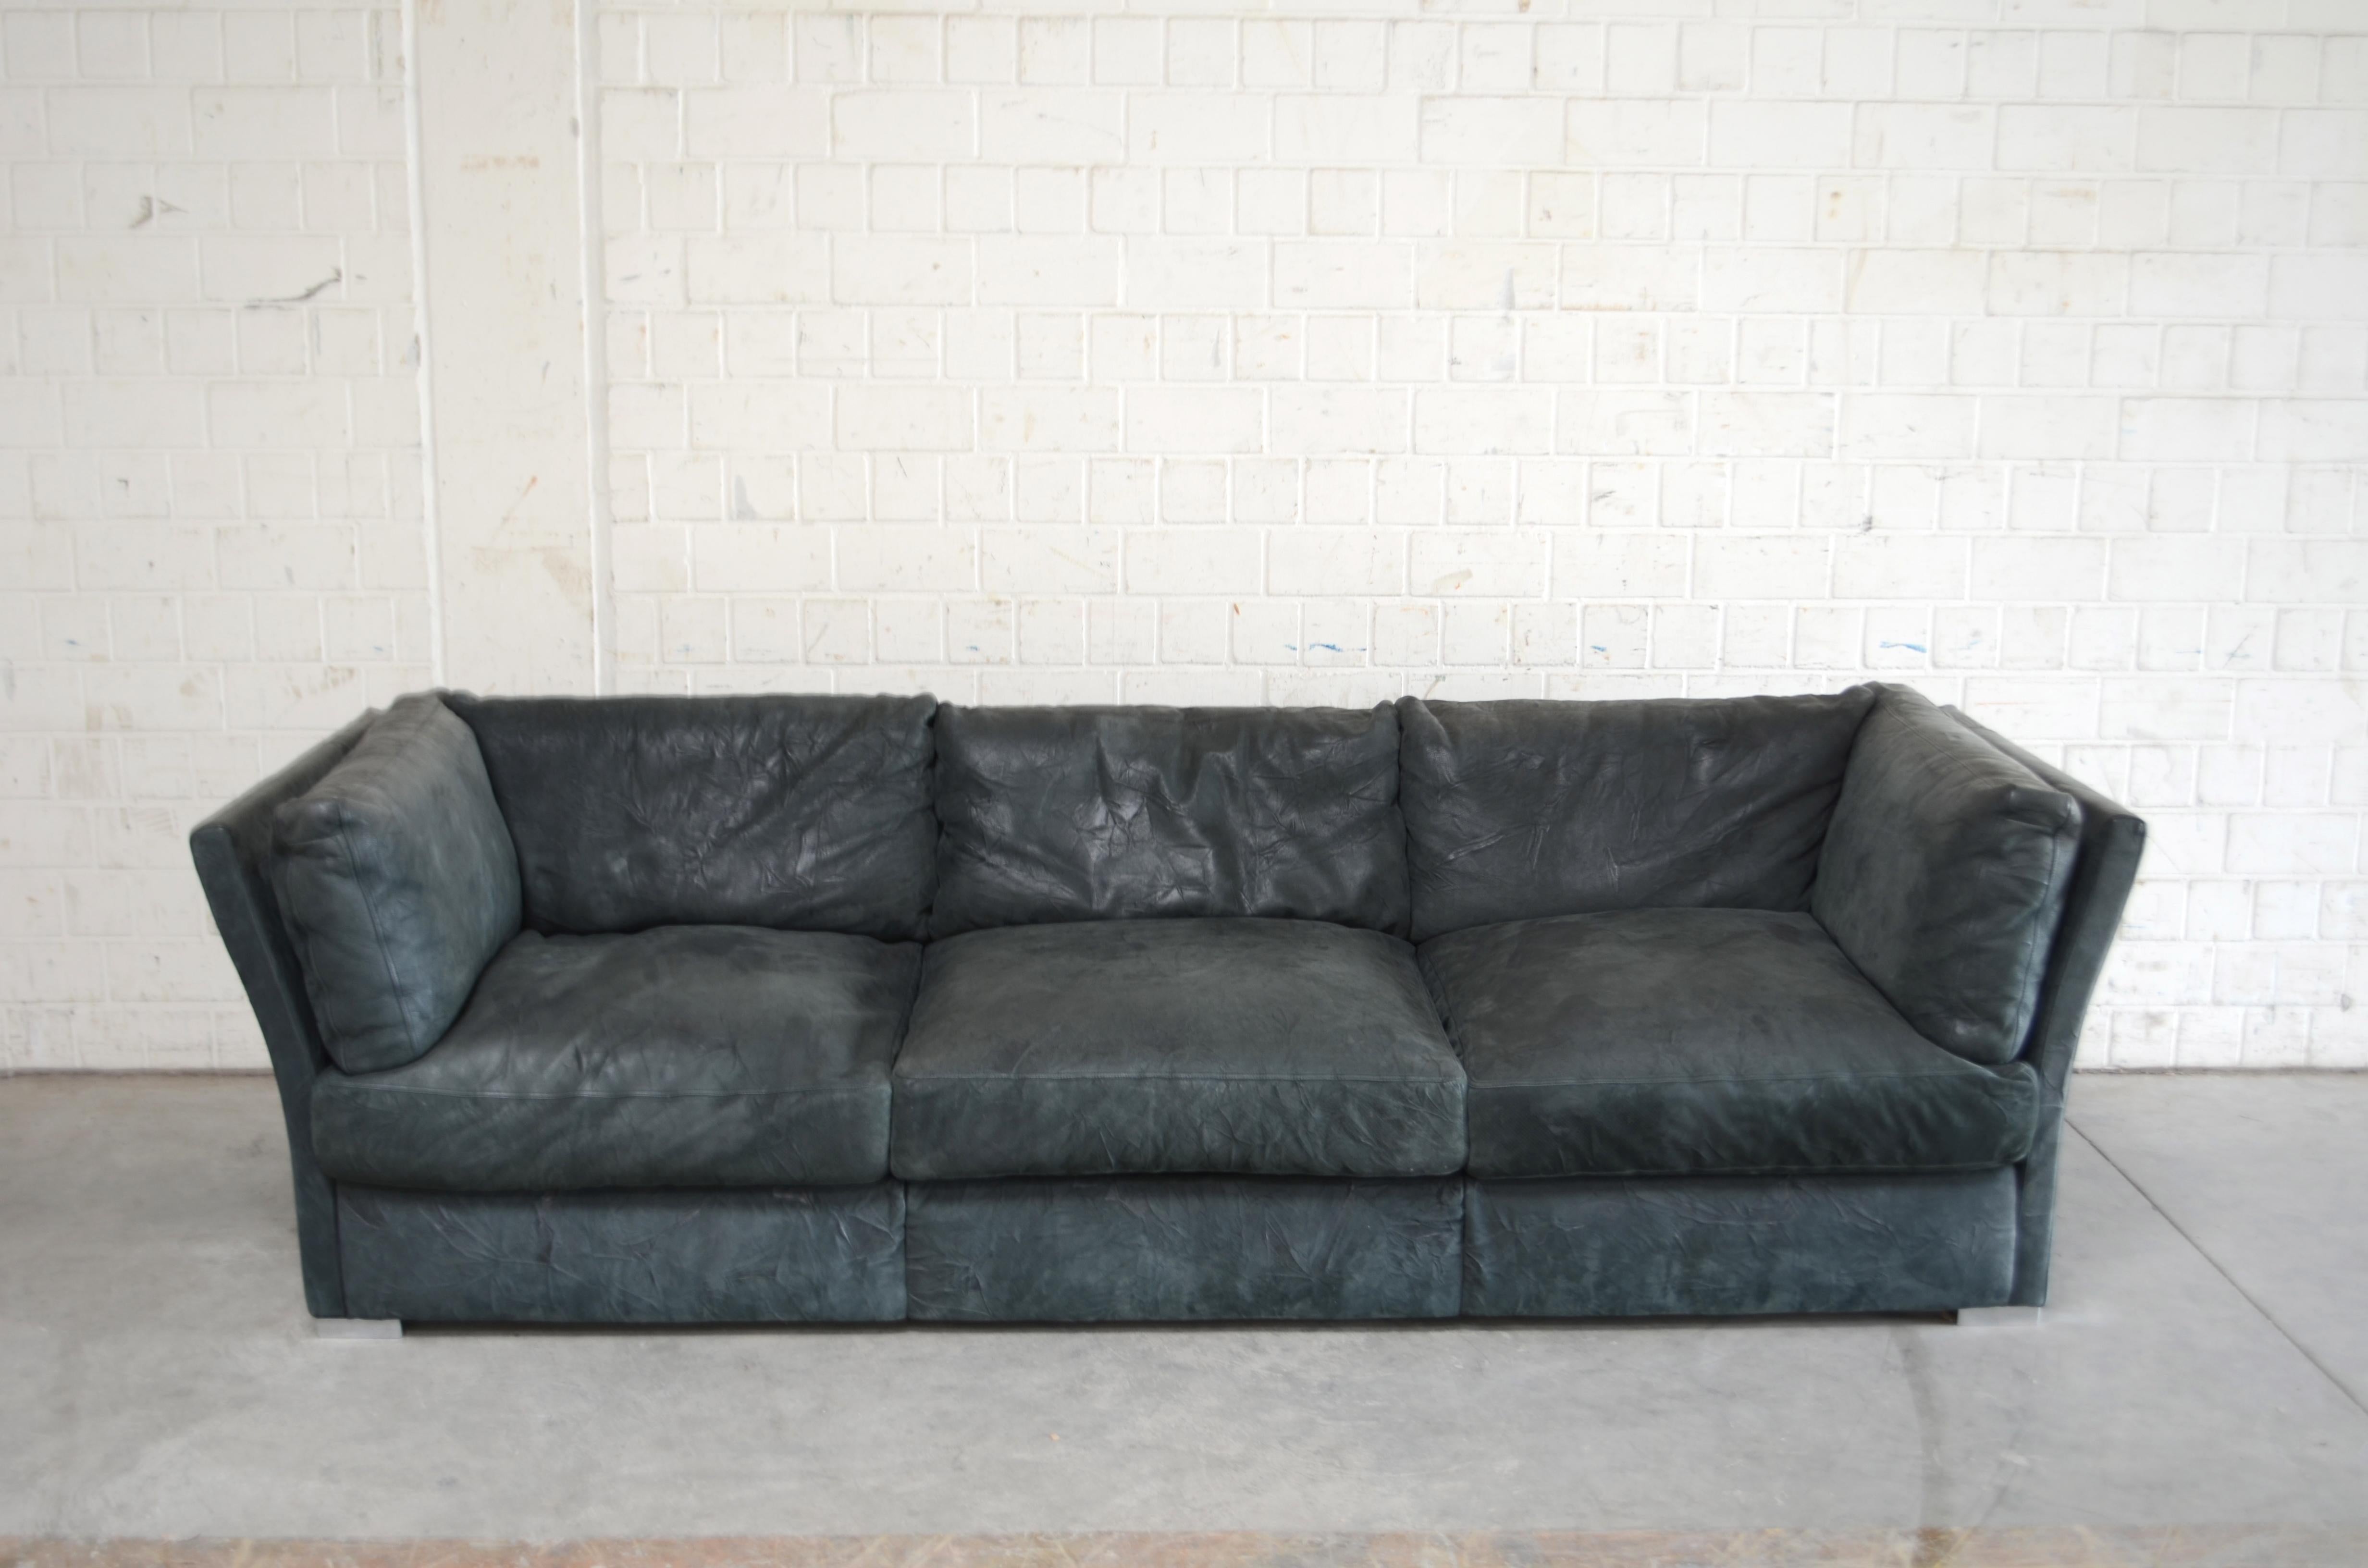 Franco Poli designed this leather sofa for Matteo Grassi. Modell Nirvana.
This sofa comes with a deluxe premium petrol aniline leather. It had a special emboss finish.
The loose cushion comes with down fillings. A comfortable und cushy seating